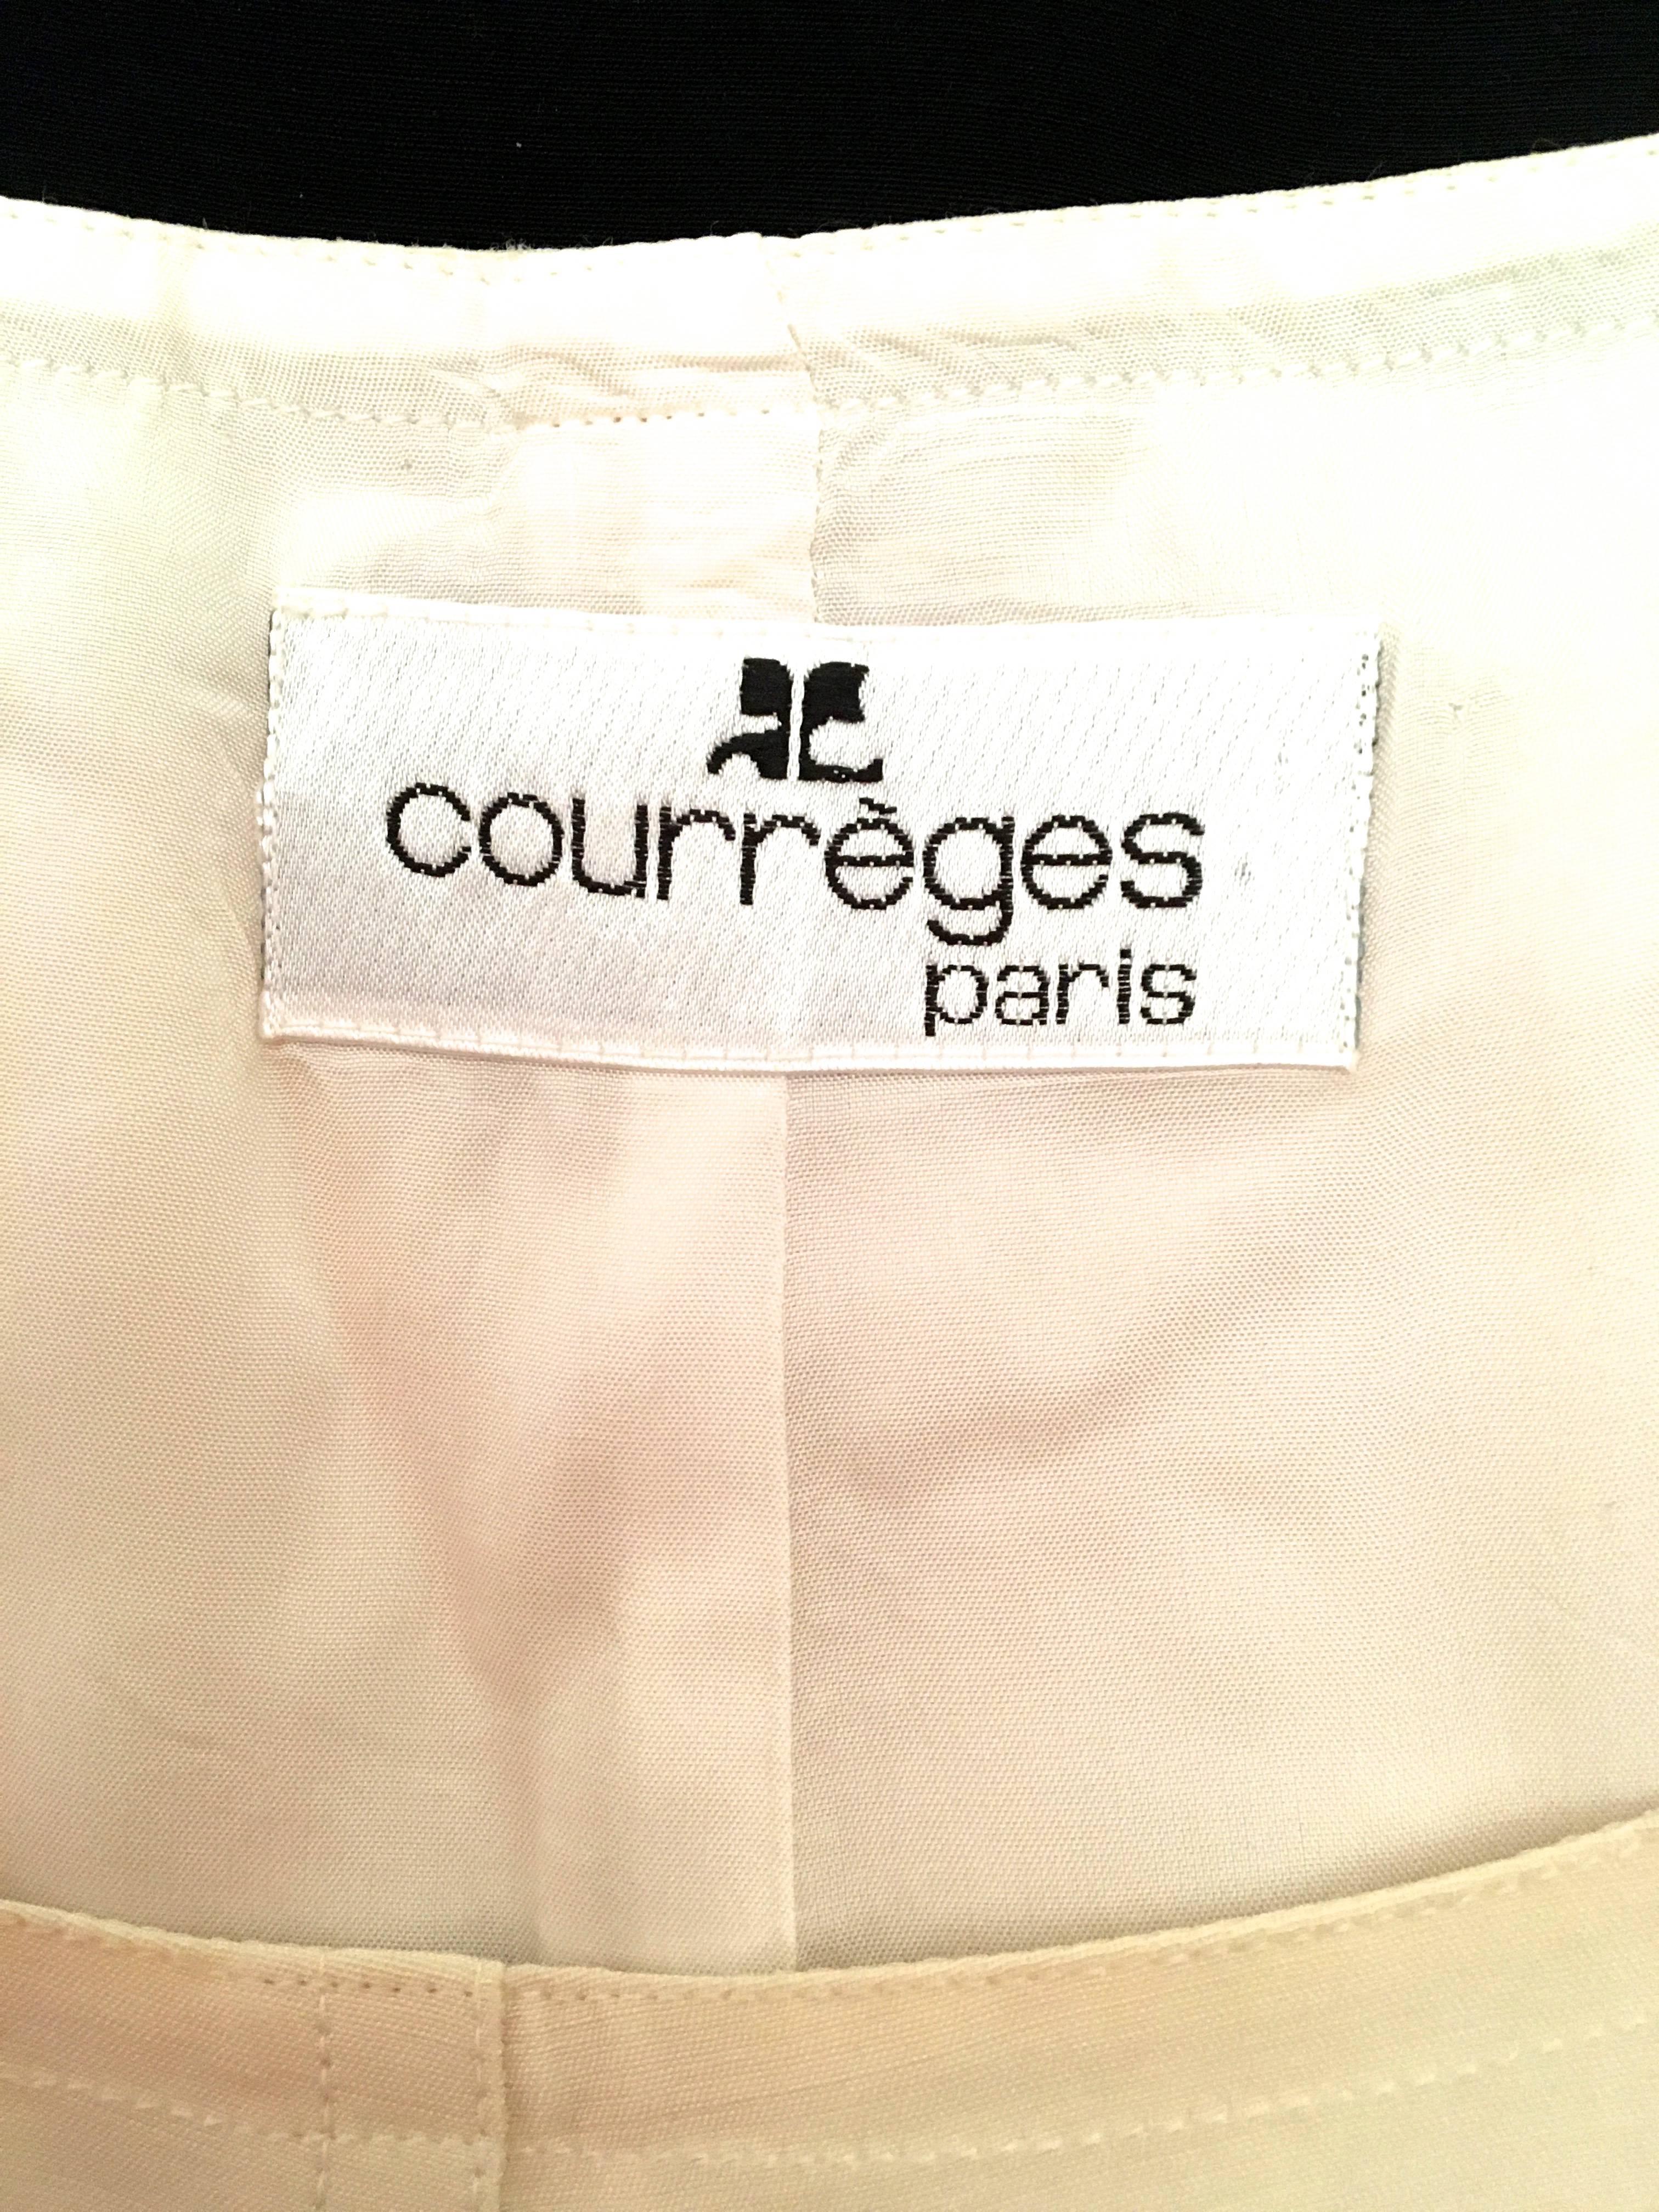 Courreges Black and White Dress In Excellent Condition For Sale In Boca Raton, FL